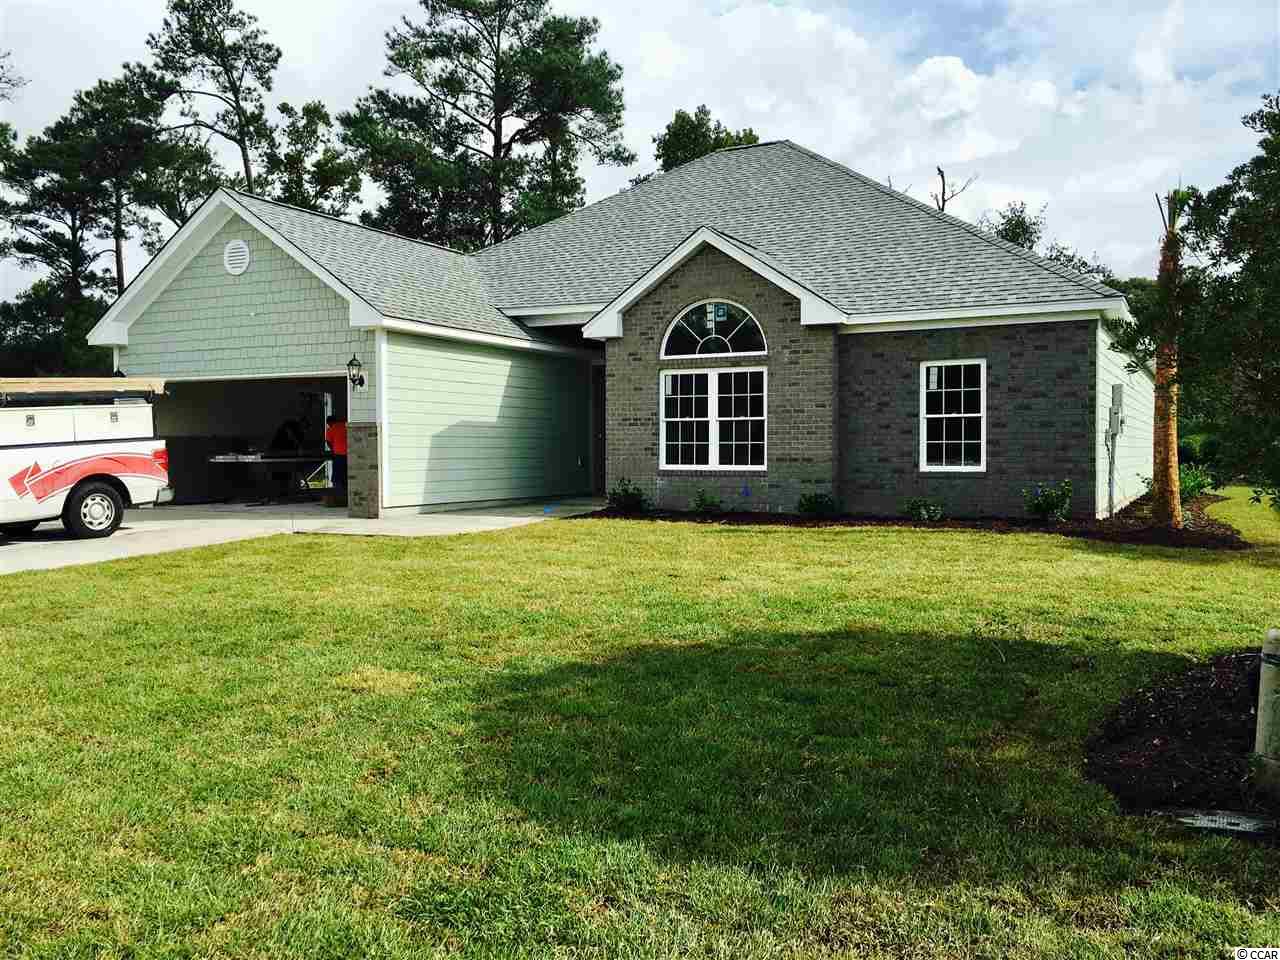 182 Swallow Tail Ct. Little River, SC 29566